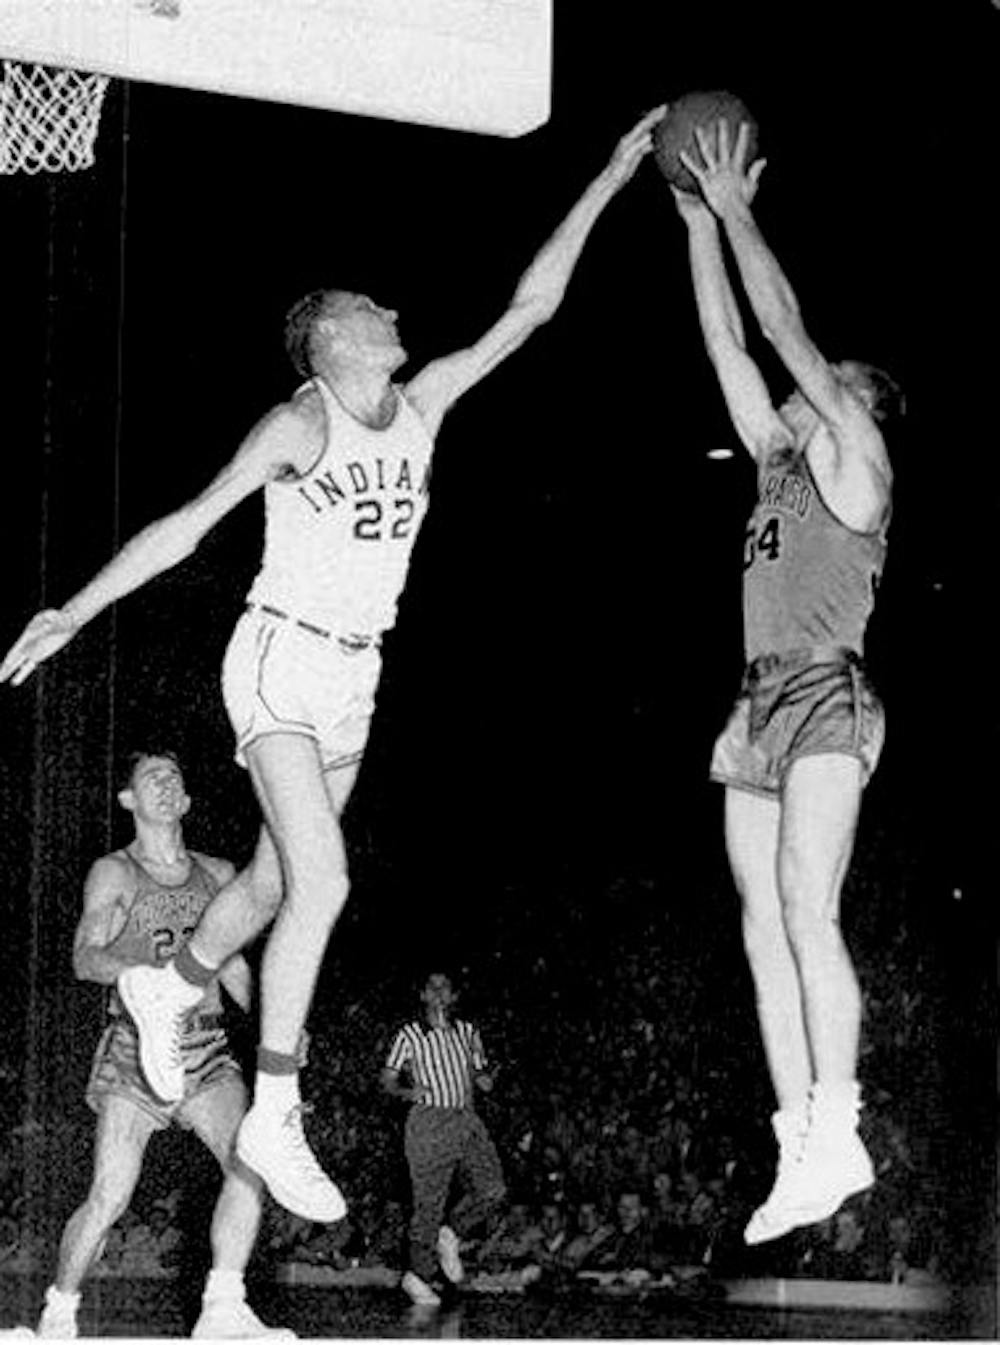 Archie Dees, left, is a legendary IU basketball player from 1955 to 1958. Dees has been died recently. 